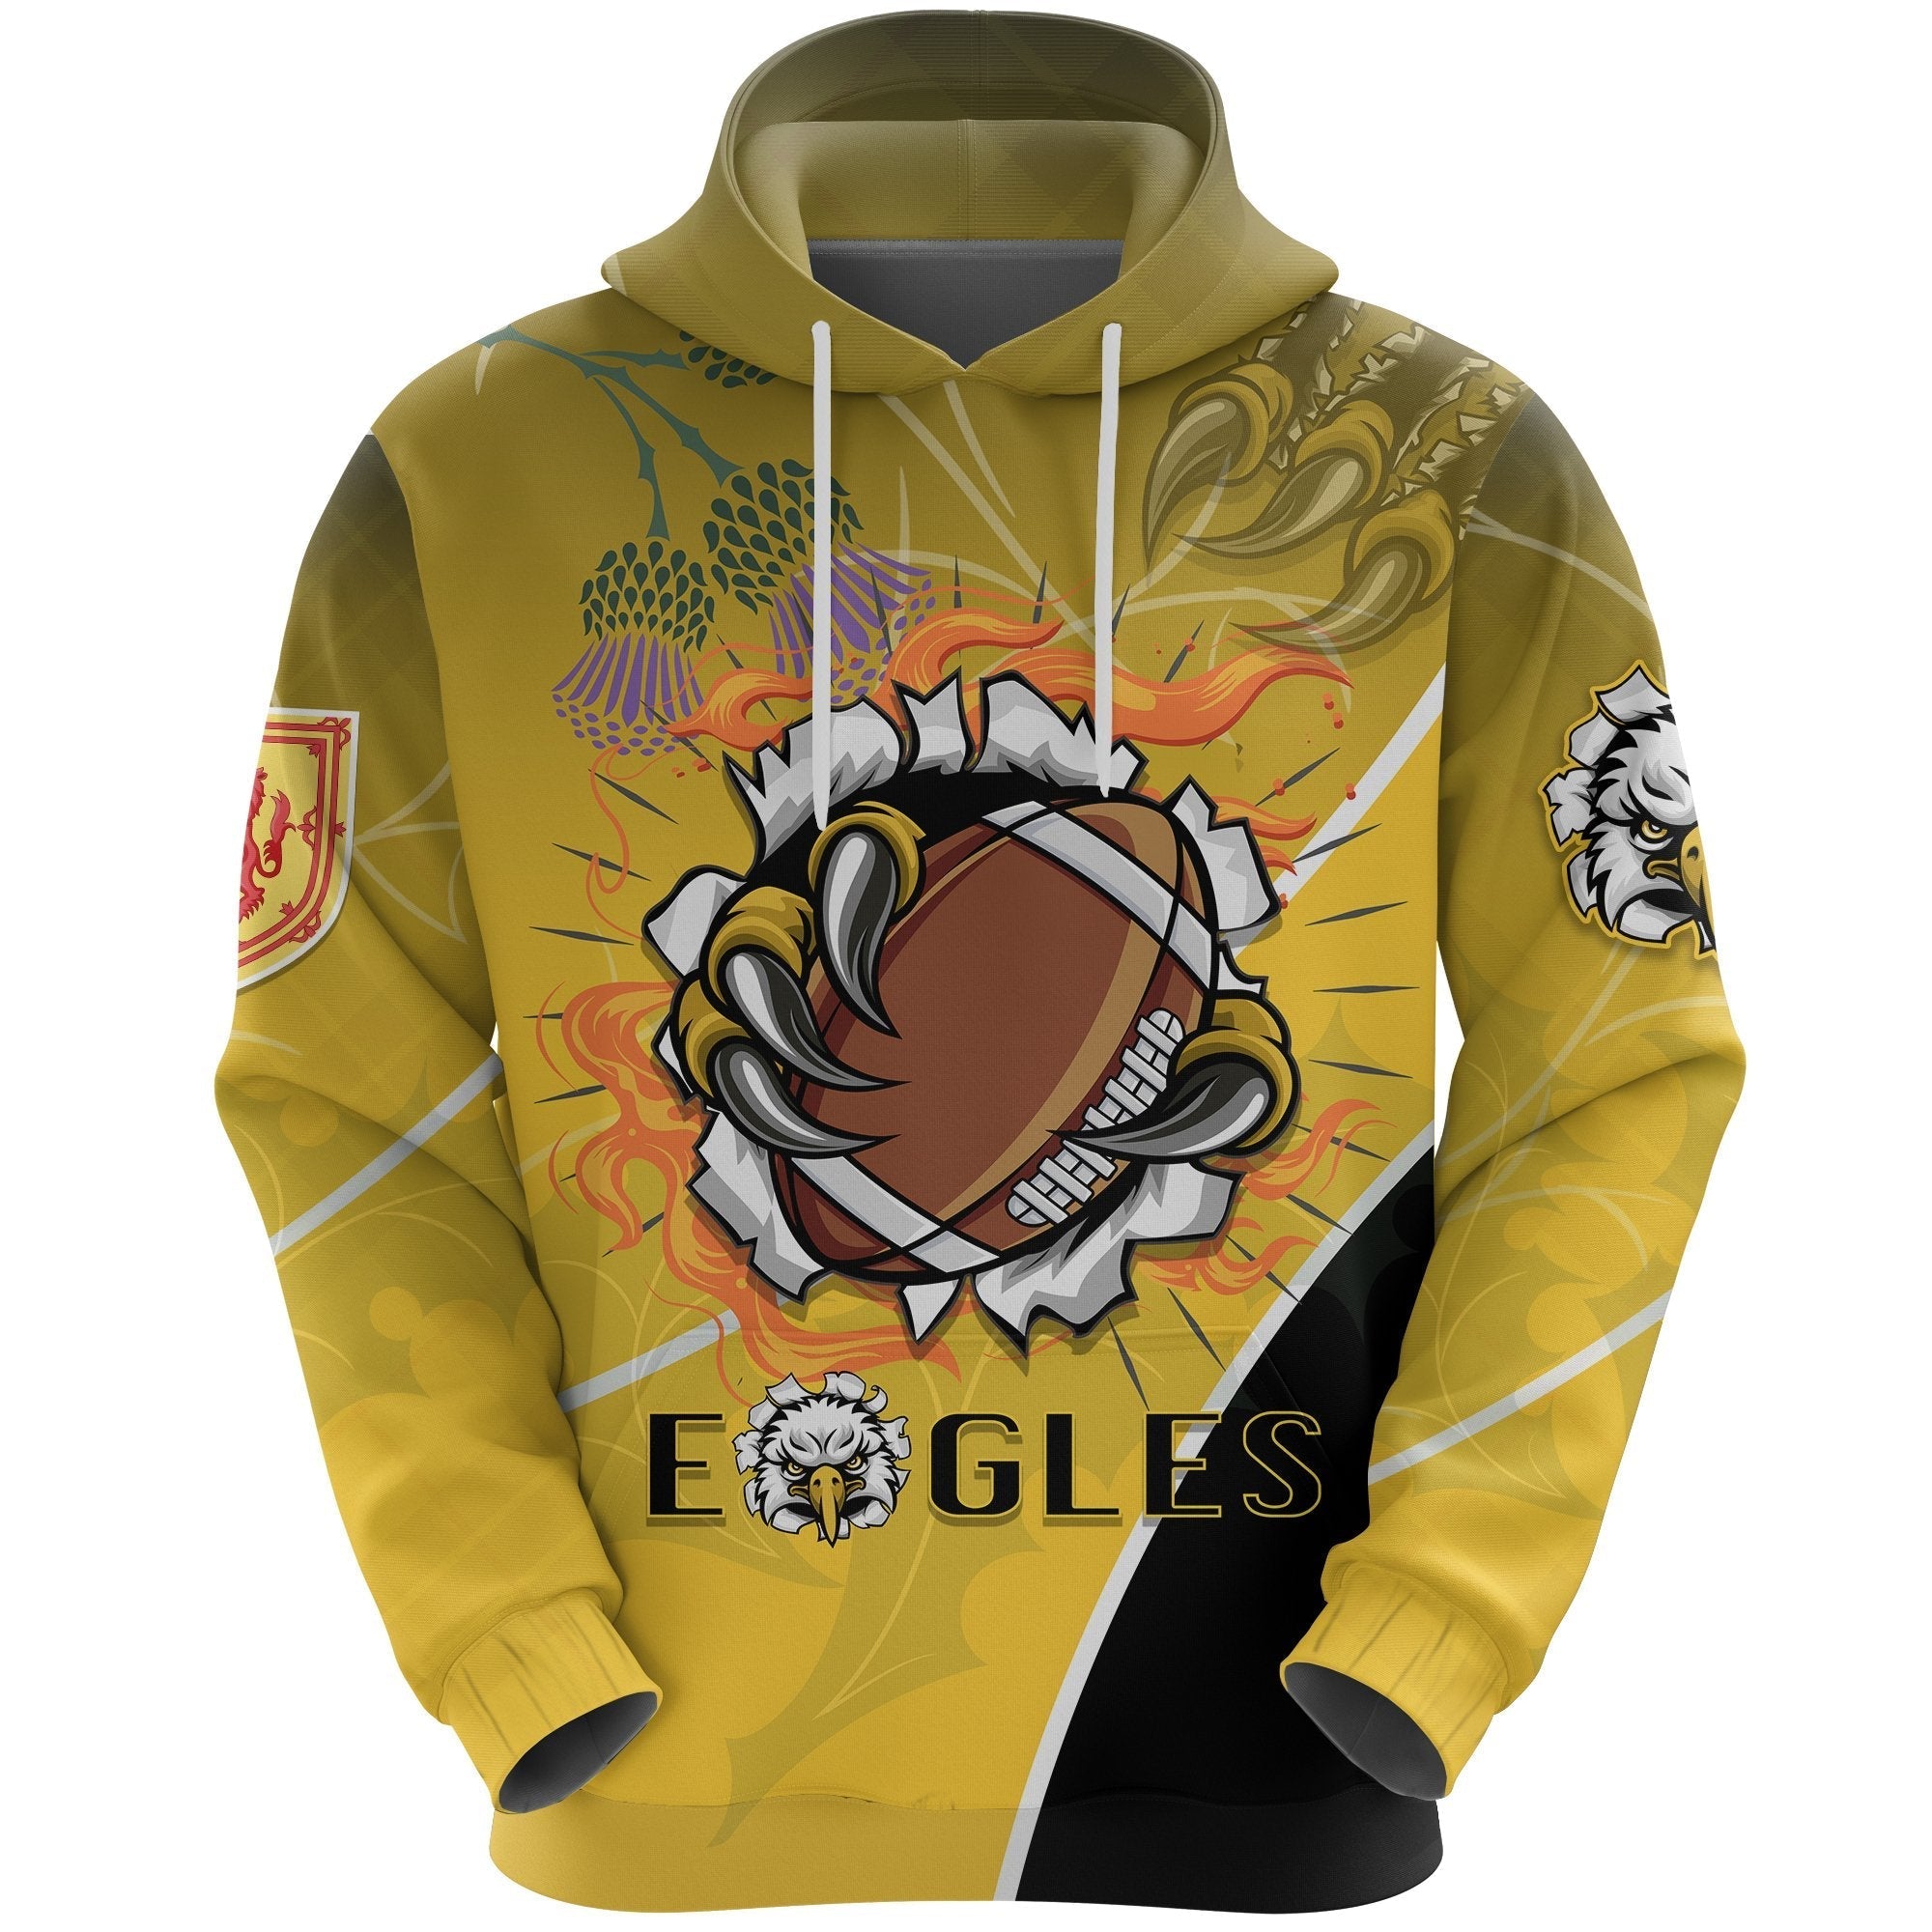 scotland-rugby-thistle-hoodie-the-eagles